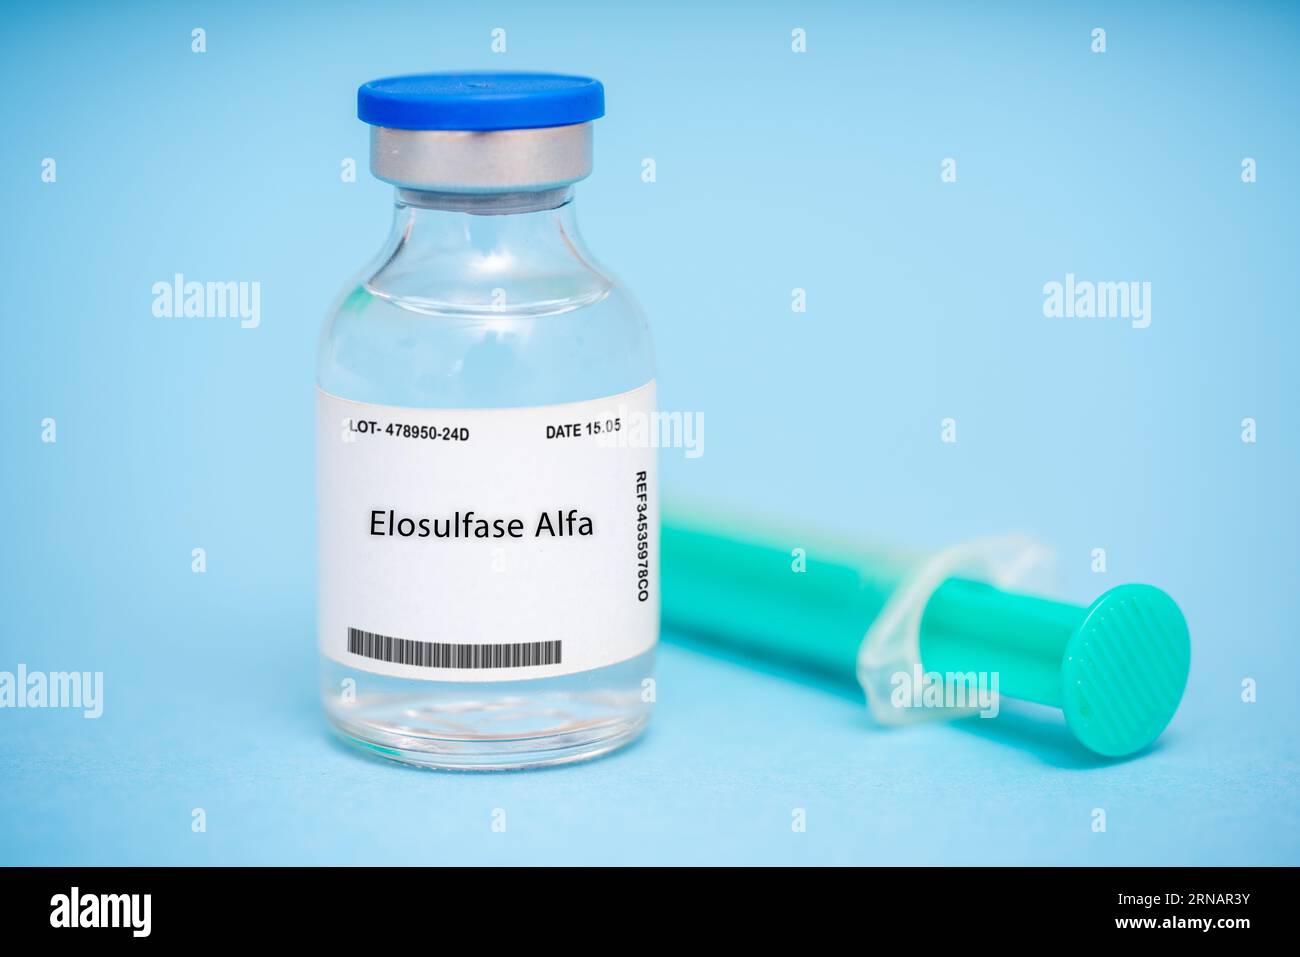 Elosulfase Alfa Medication used to treat certain types of mucopolysaccharidosis Mucopolysaccharidosis Enzyme replacement therapy Injection Stock Photo